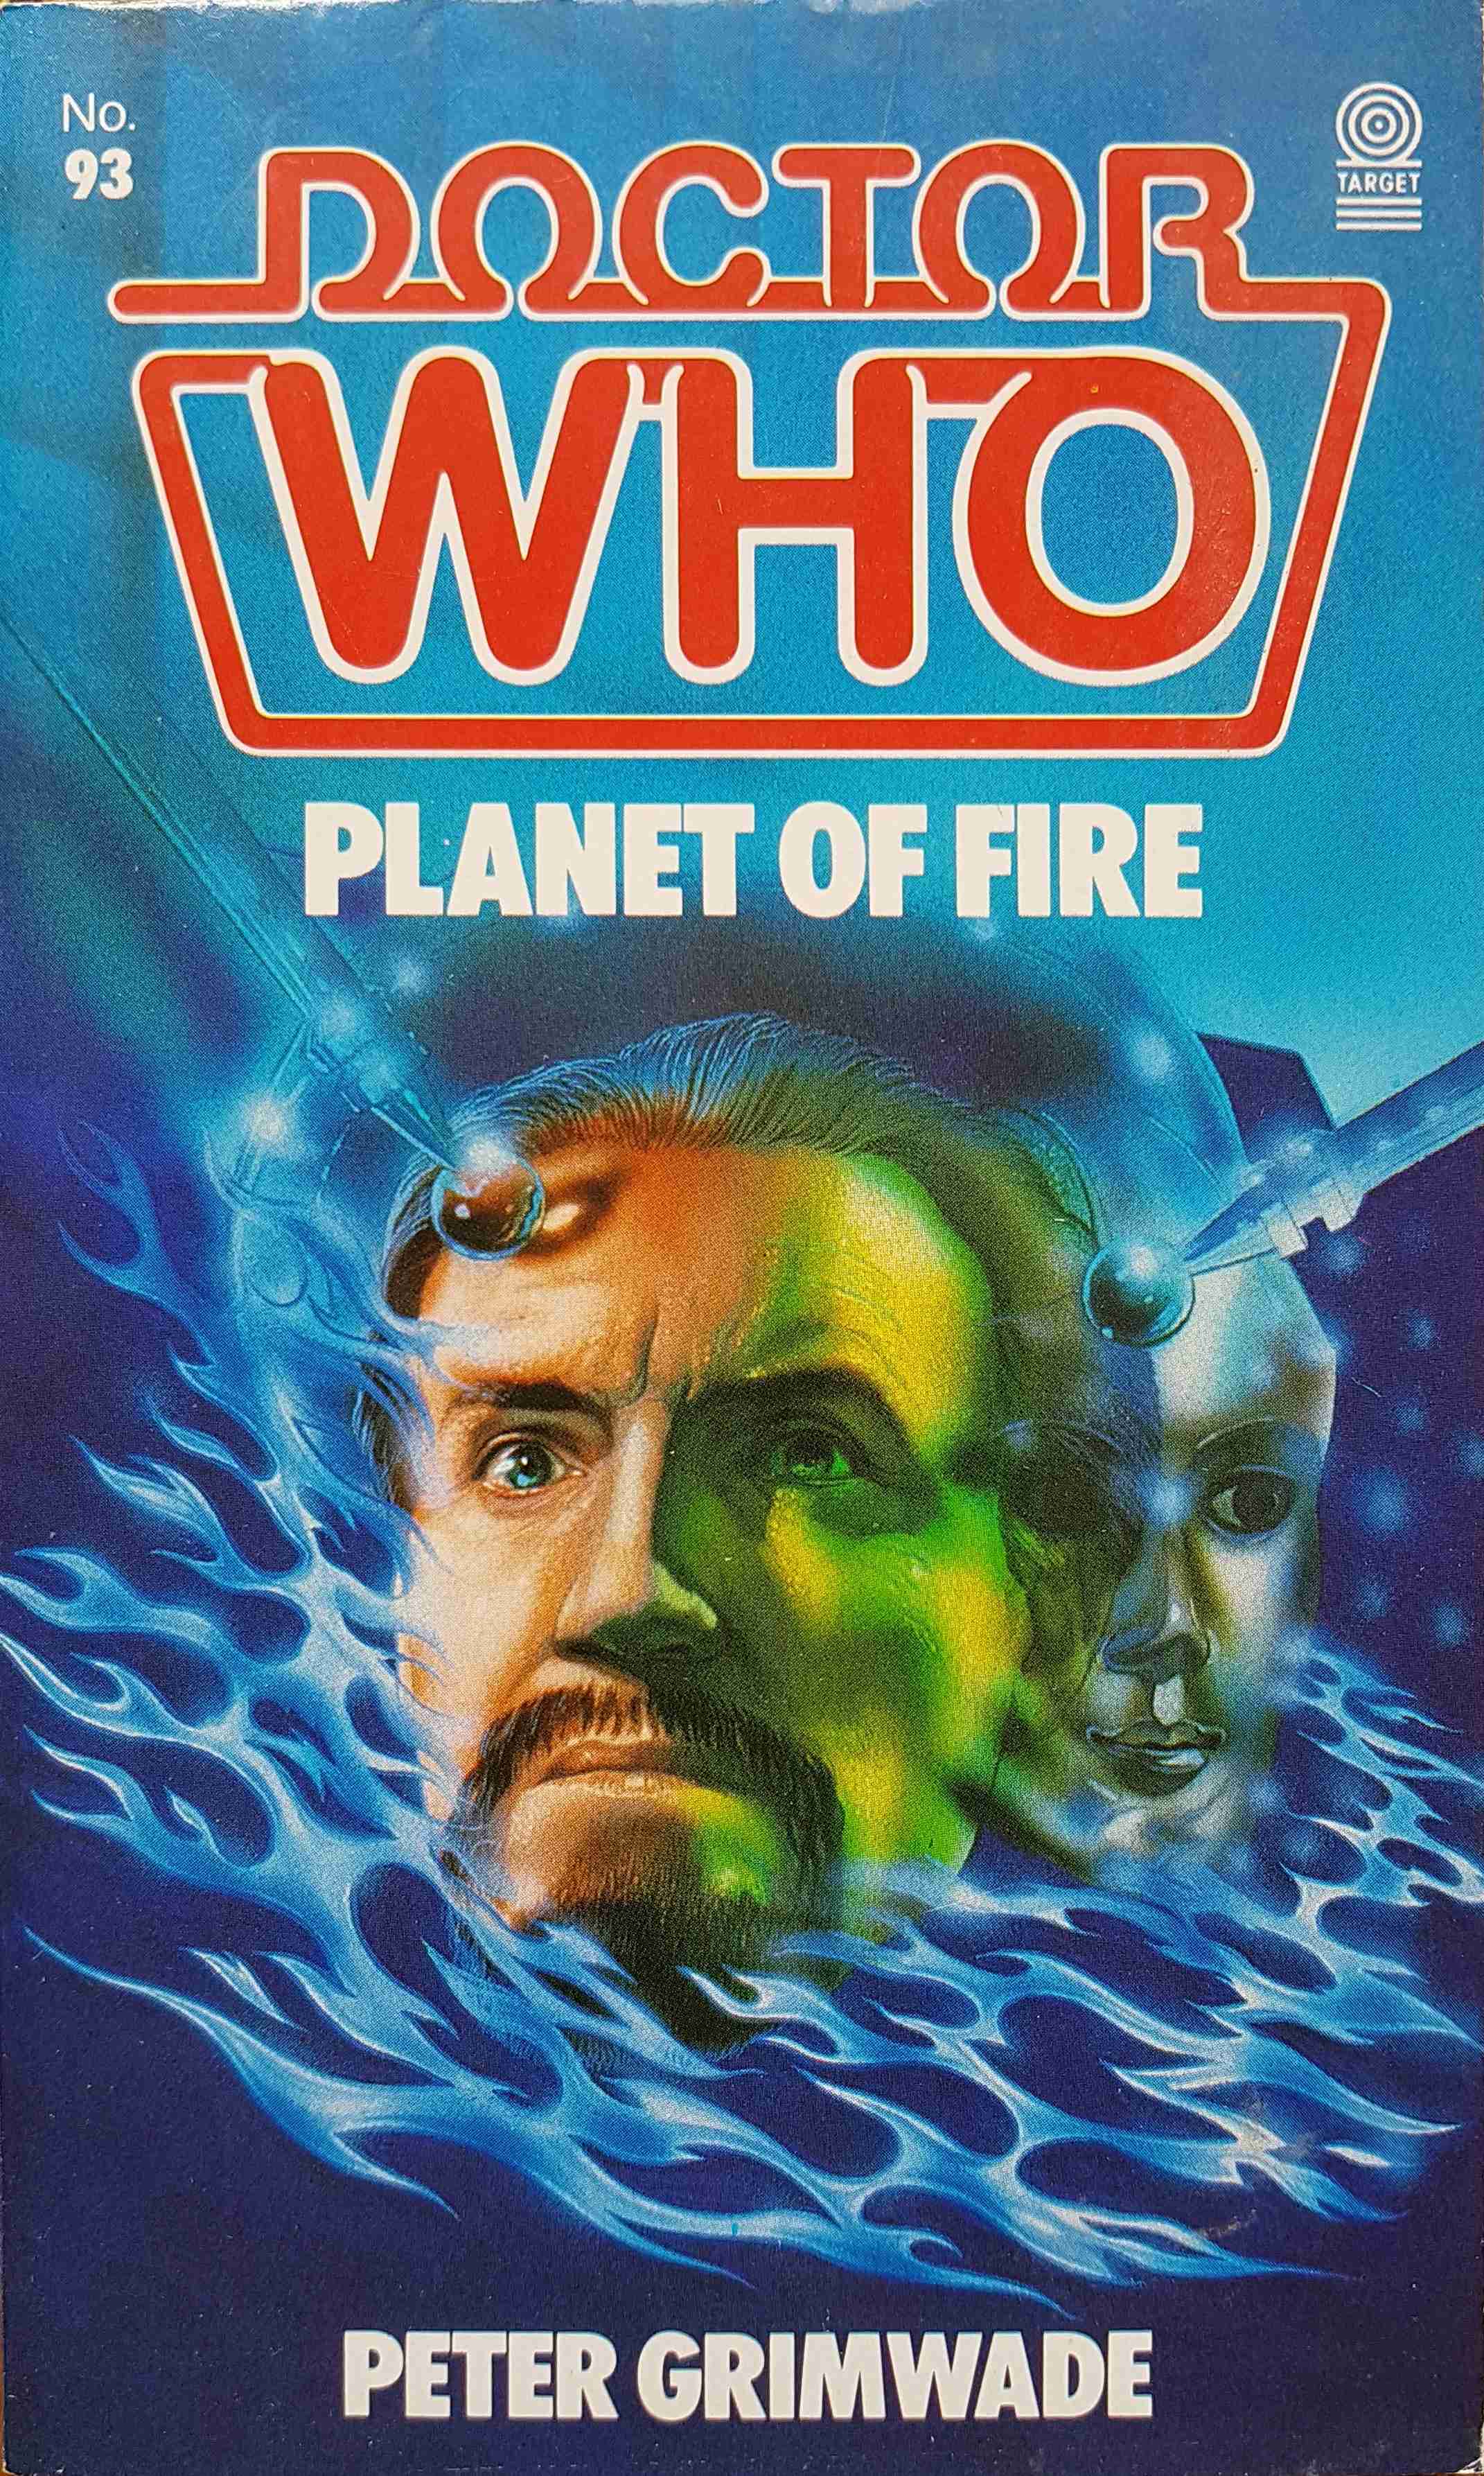 Picture of 0-426-19940-5 Doctor Who - Planet of fire by artist Peter Grimwade from the BBC records and Tapes library